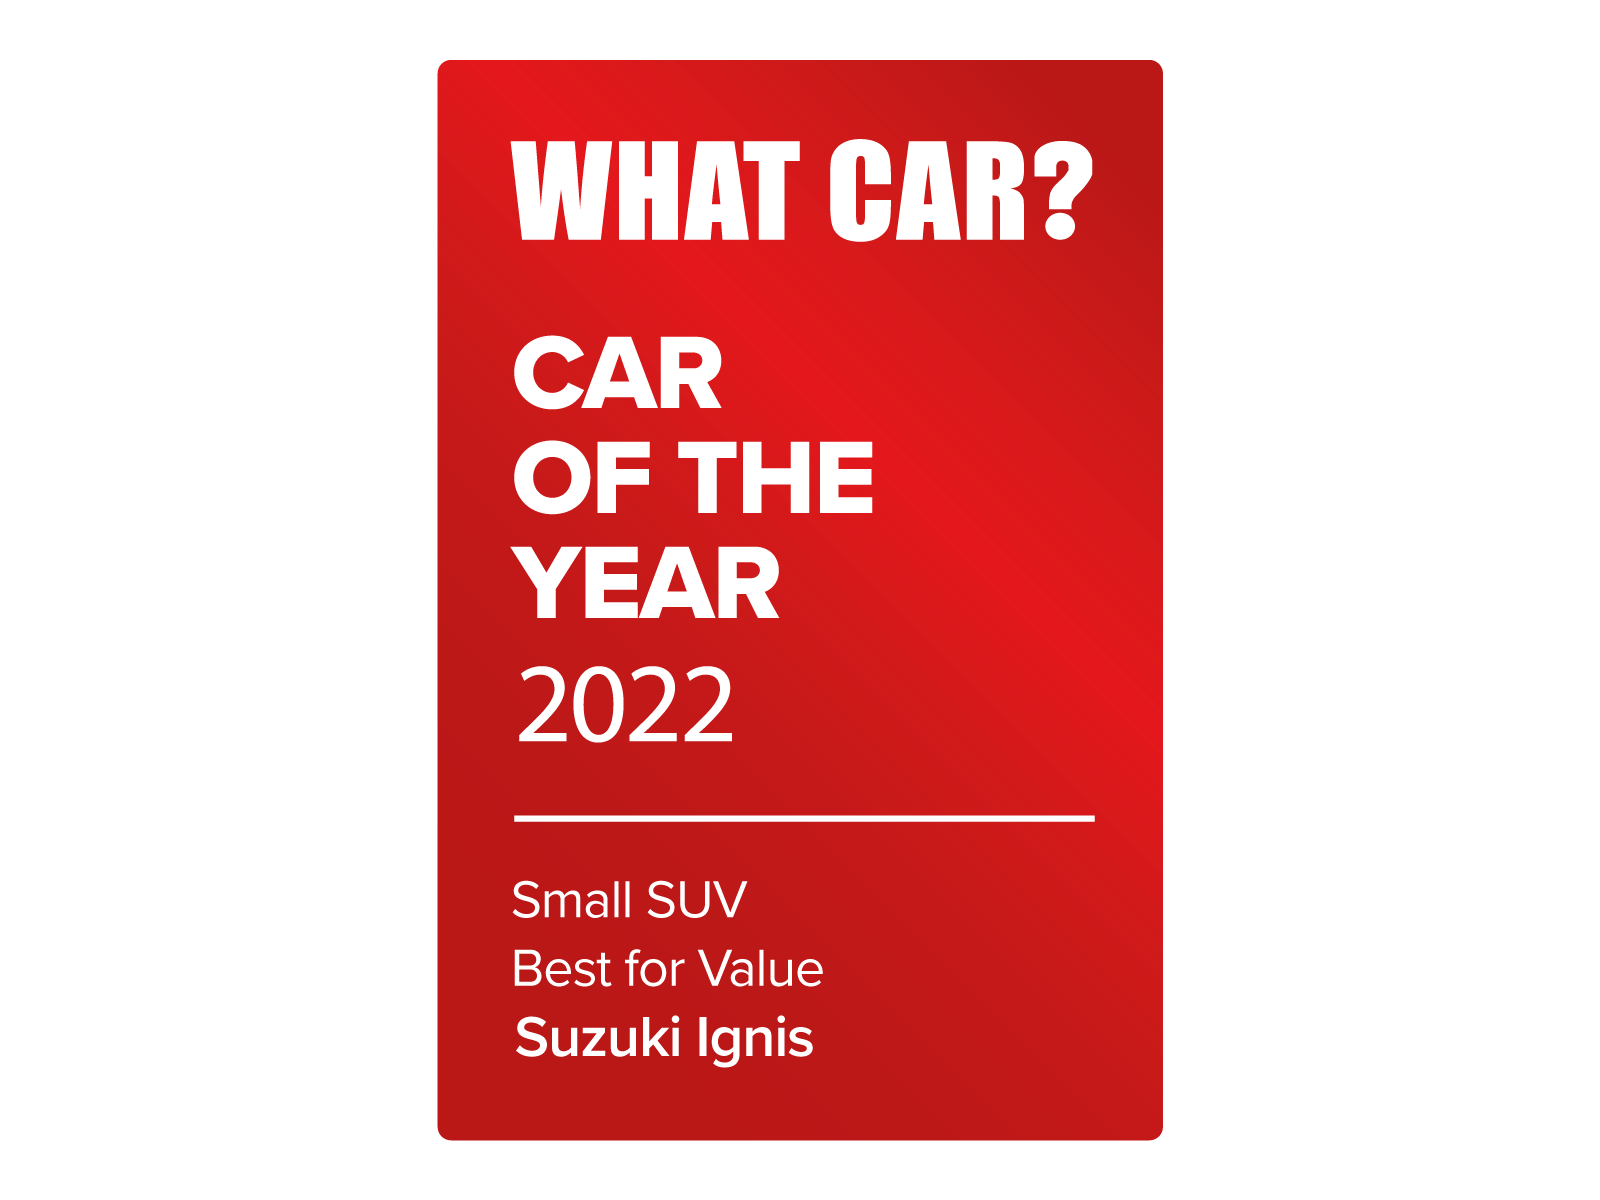 What Car? Best Small SUV for Value 2022 - Suzuki Ignis